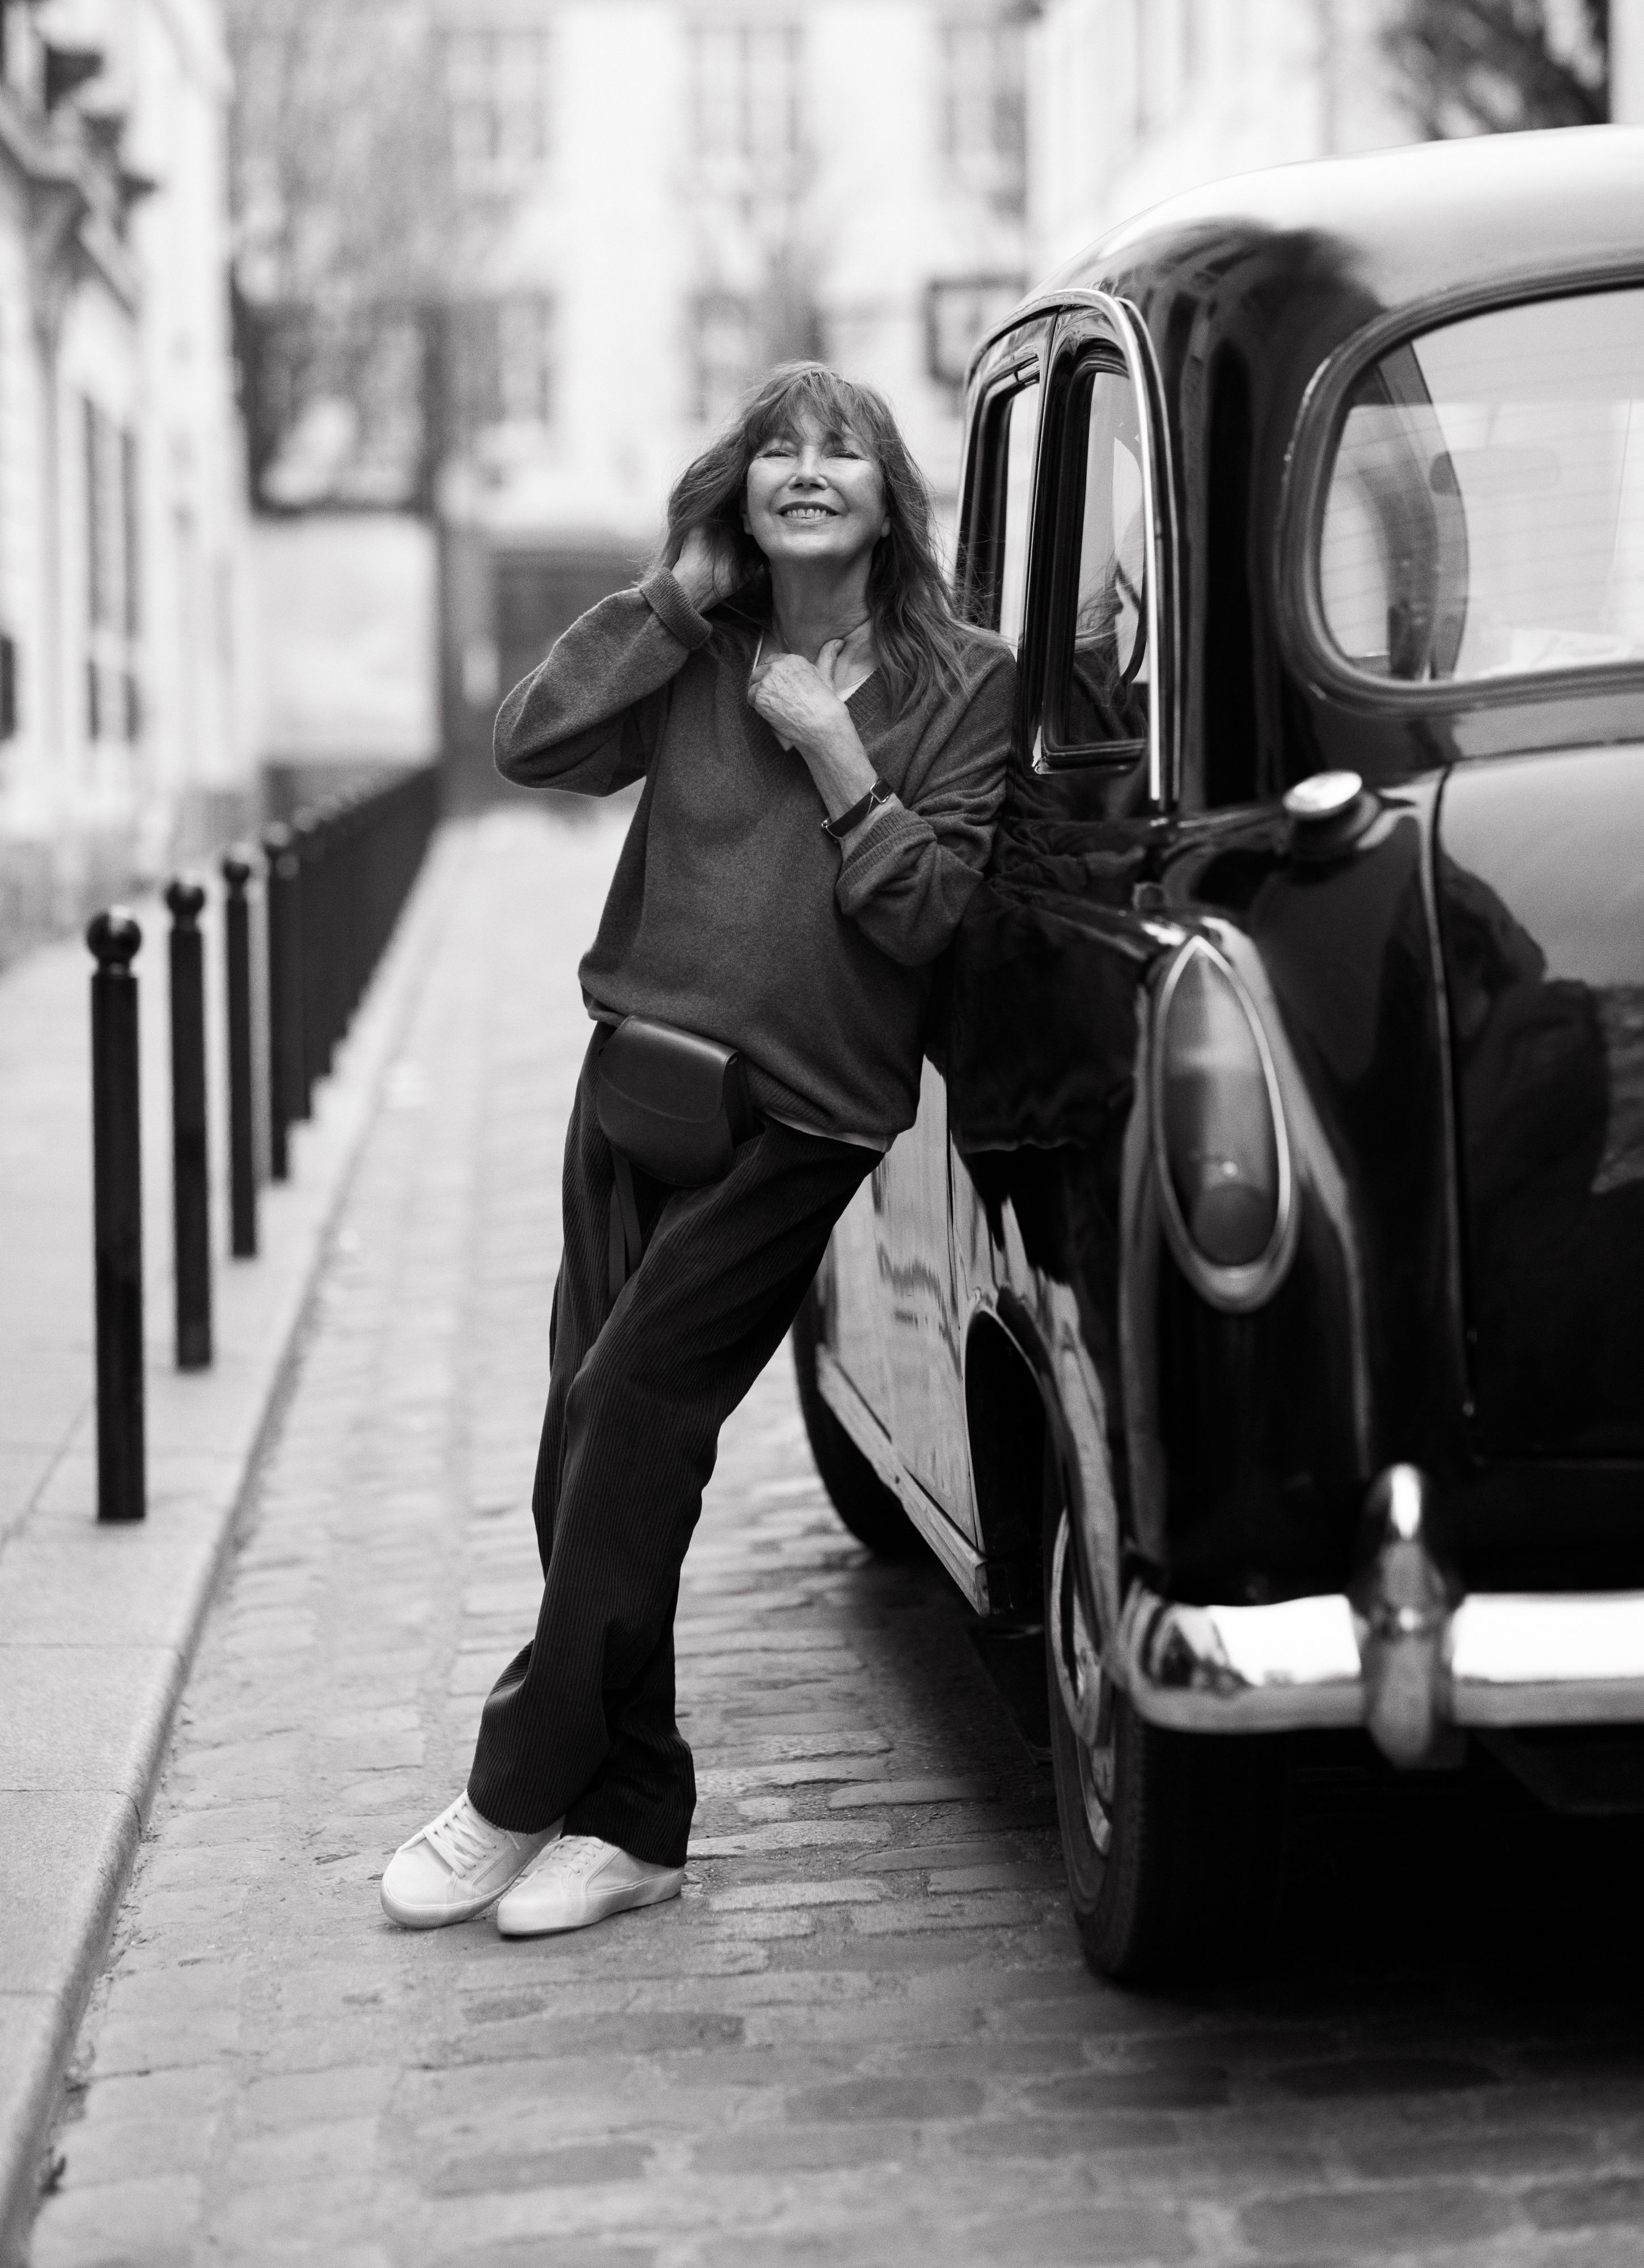 Exclusive: Jane Birkin On Her Collaboration with A.P.C.